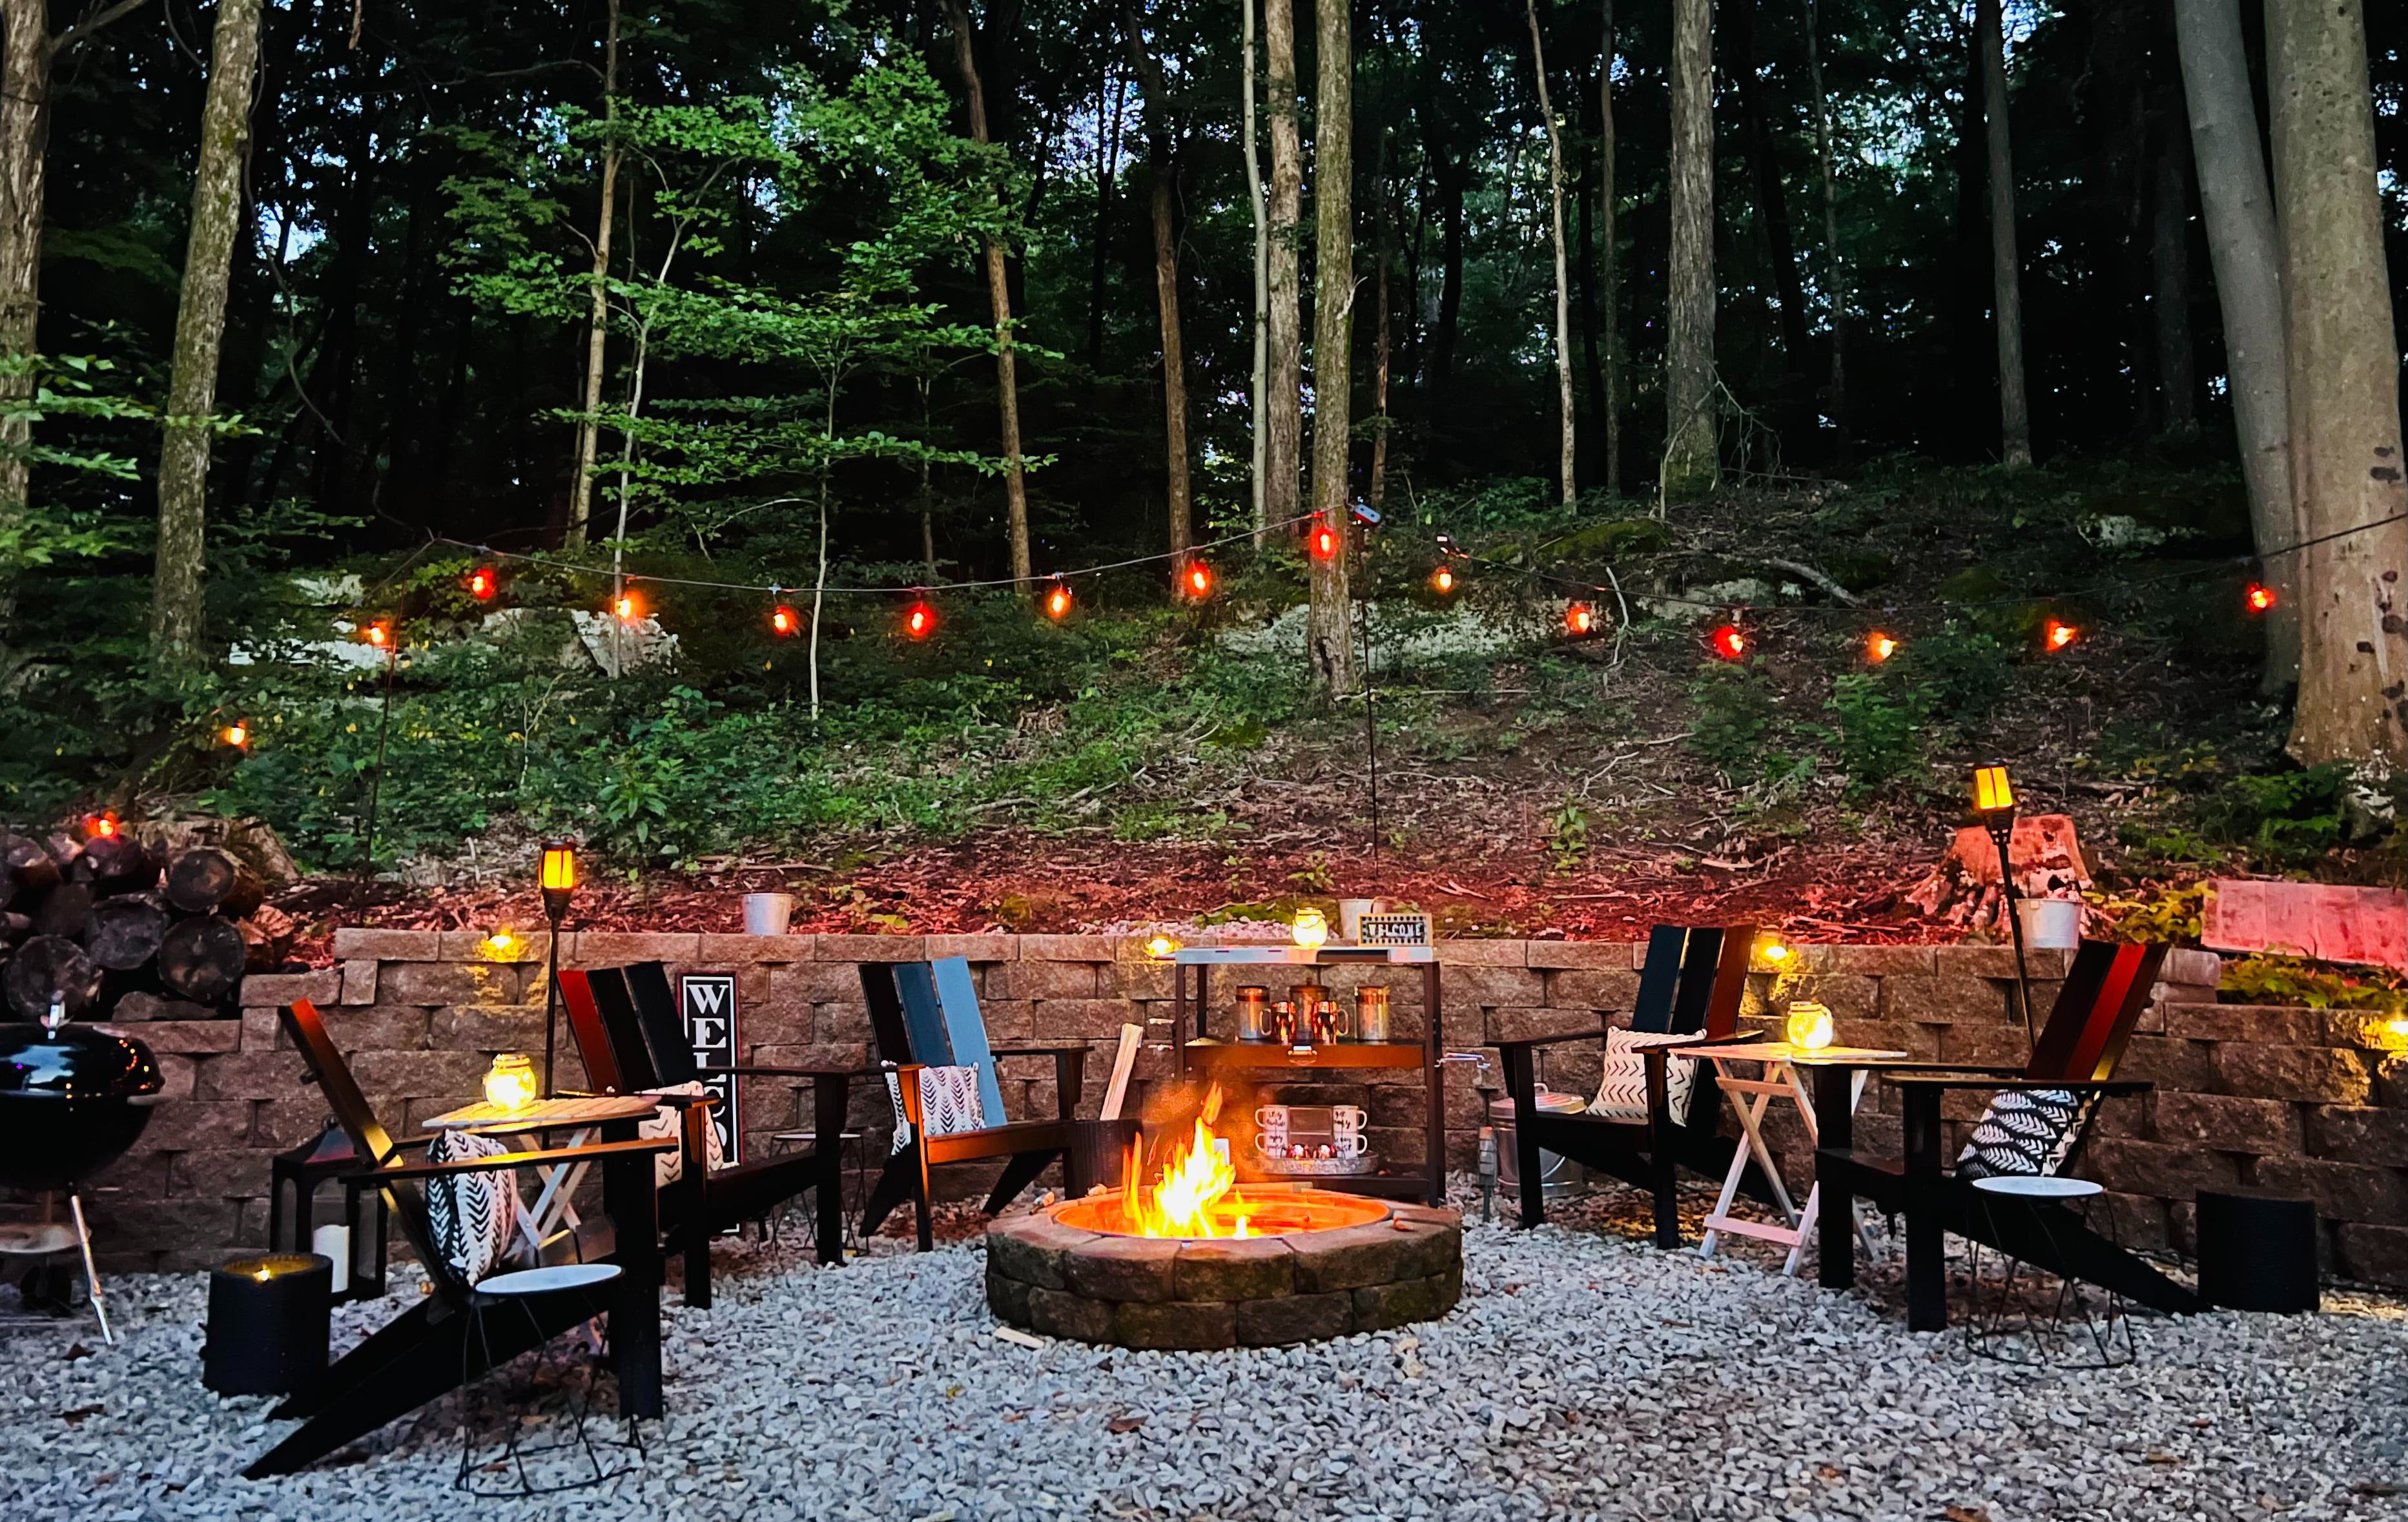 How to Choose a Fire Pit?